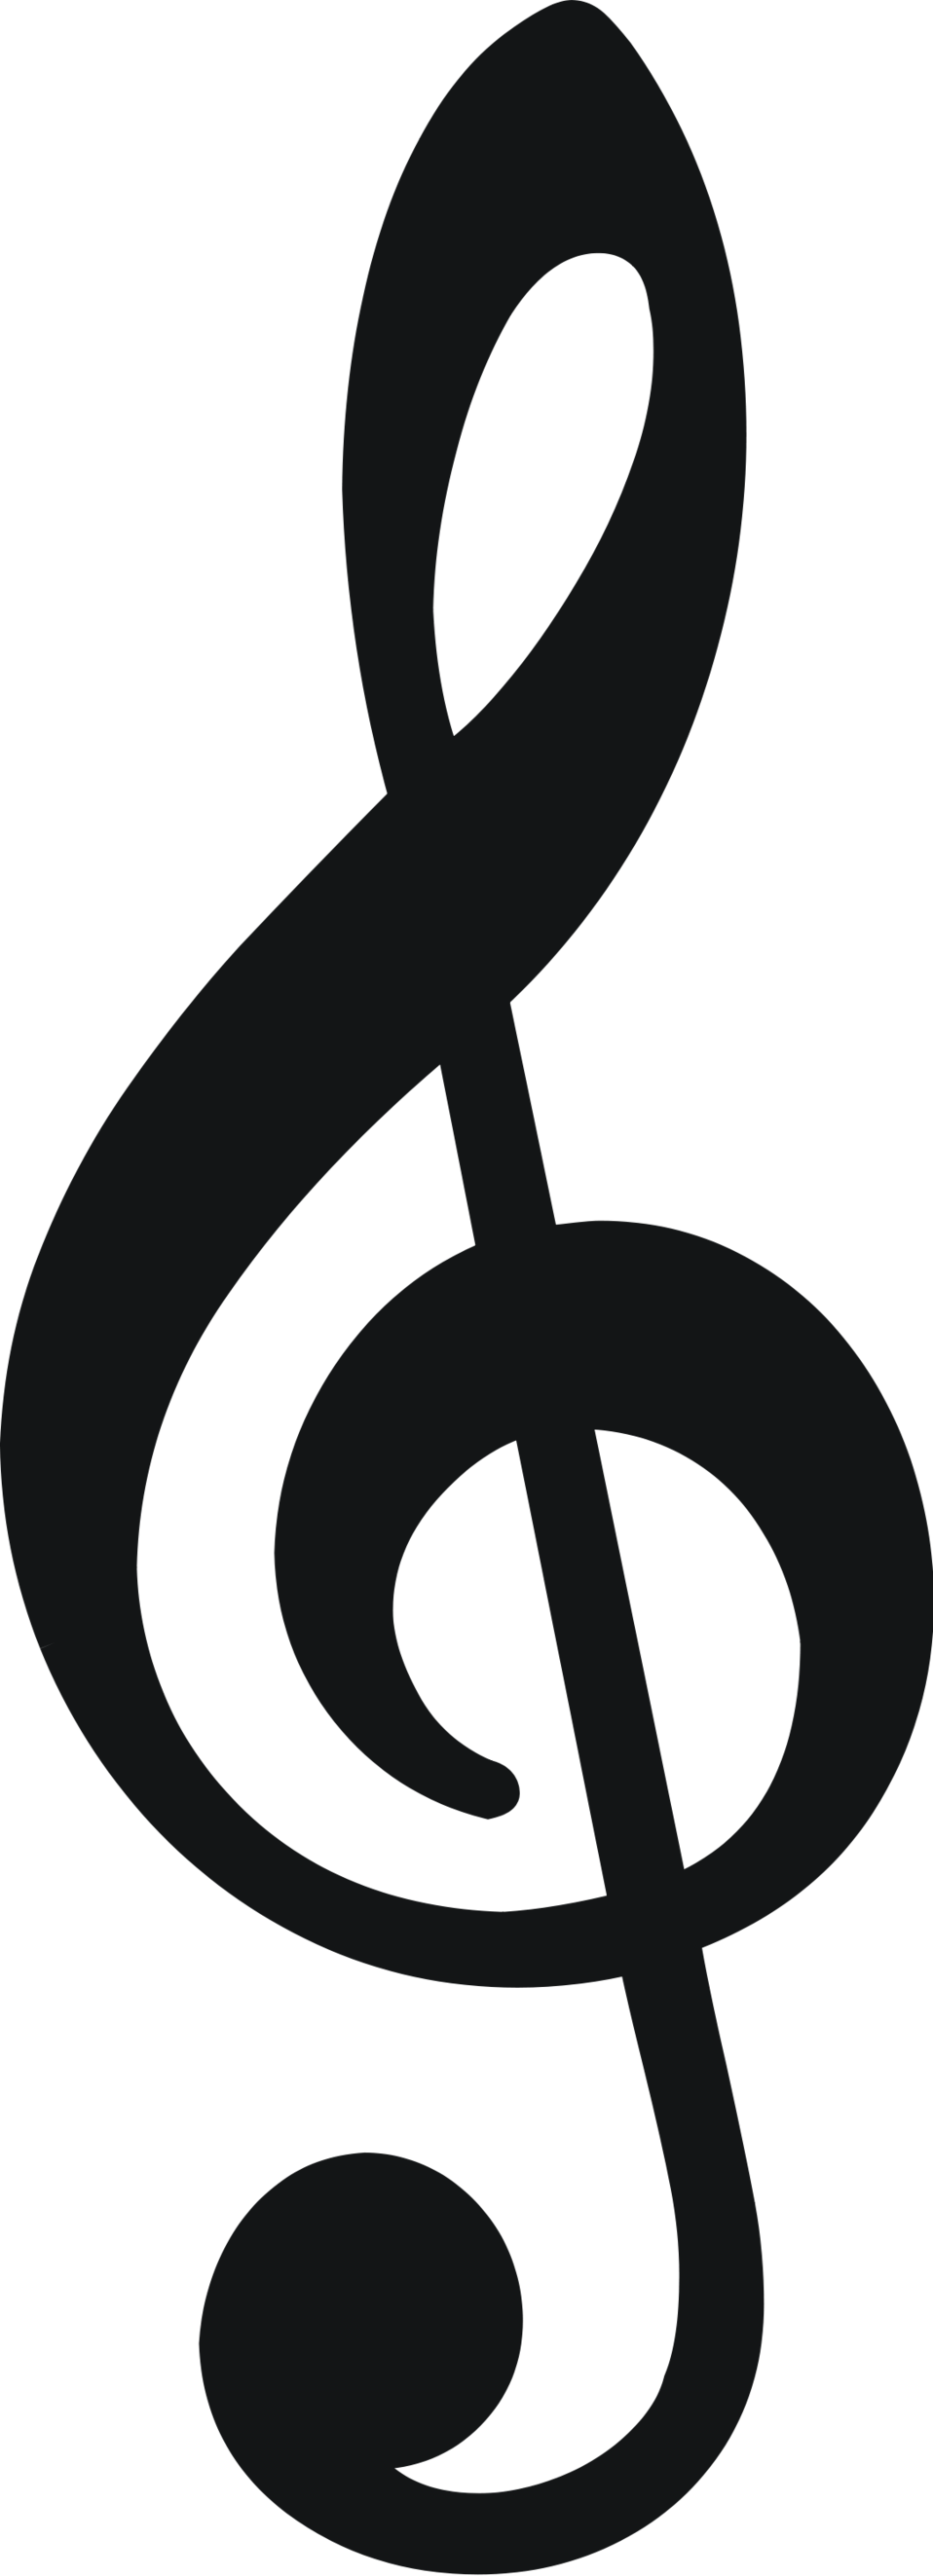 Free Picture Of Treble Clef, Download Free Clip Art, Free.